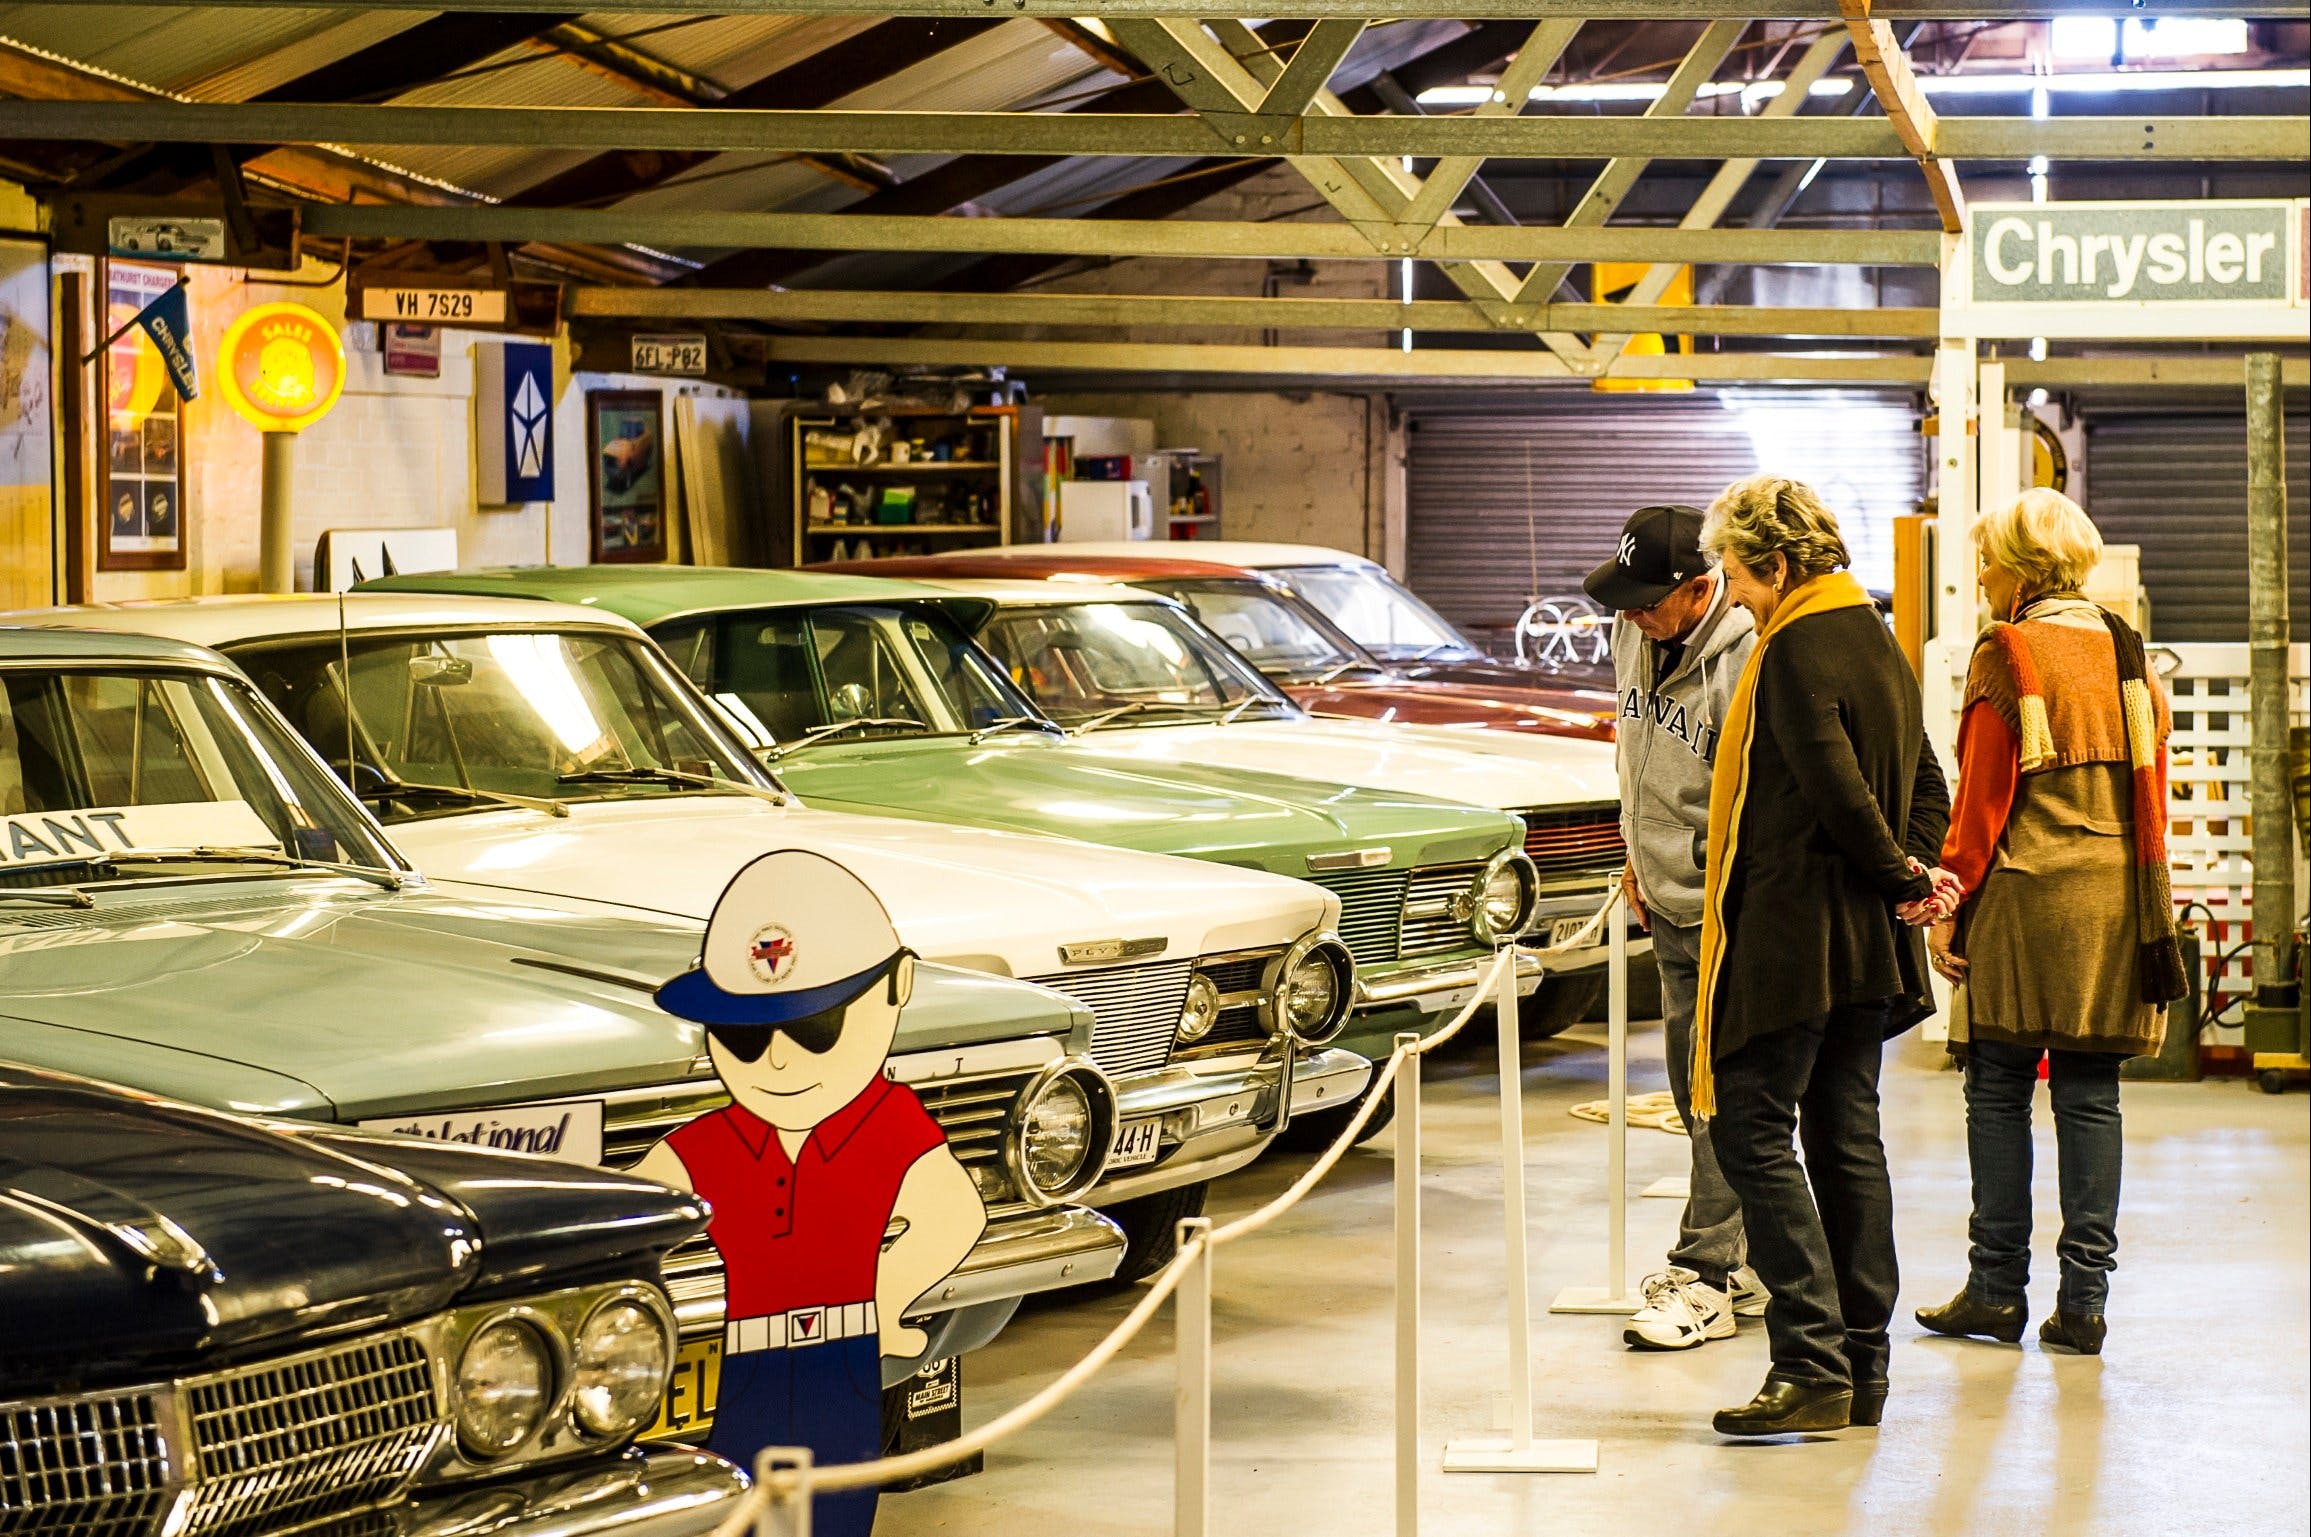 Chrysler Car Museum - Attractions